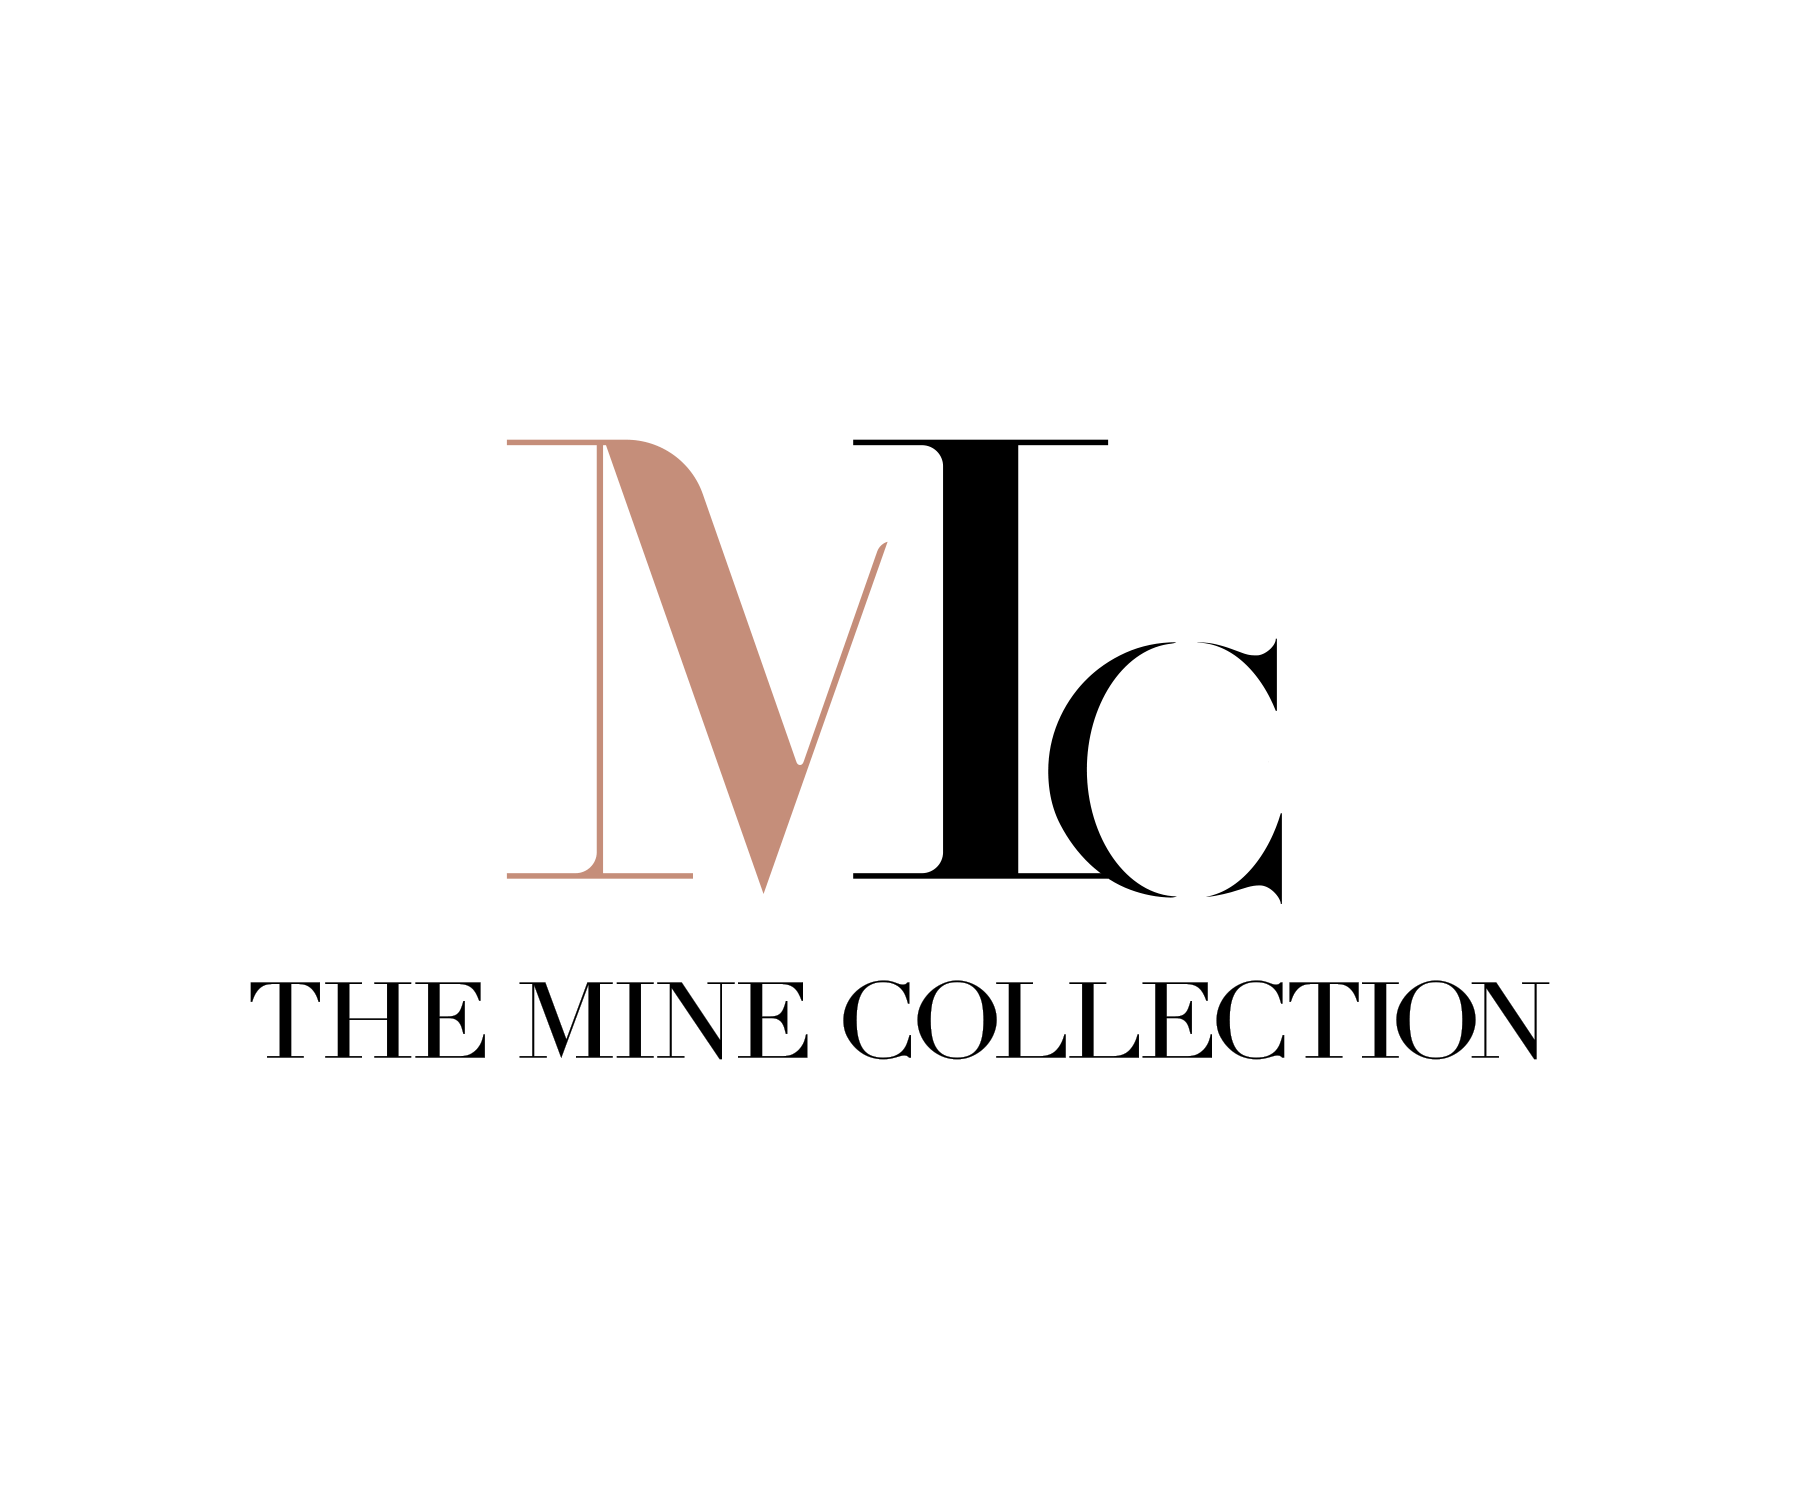 THE MINE COLLECTION